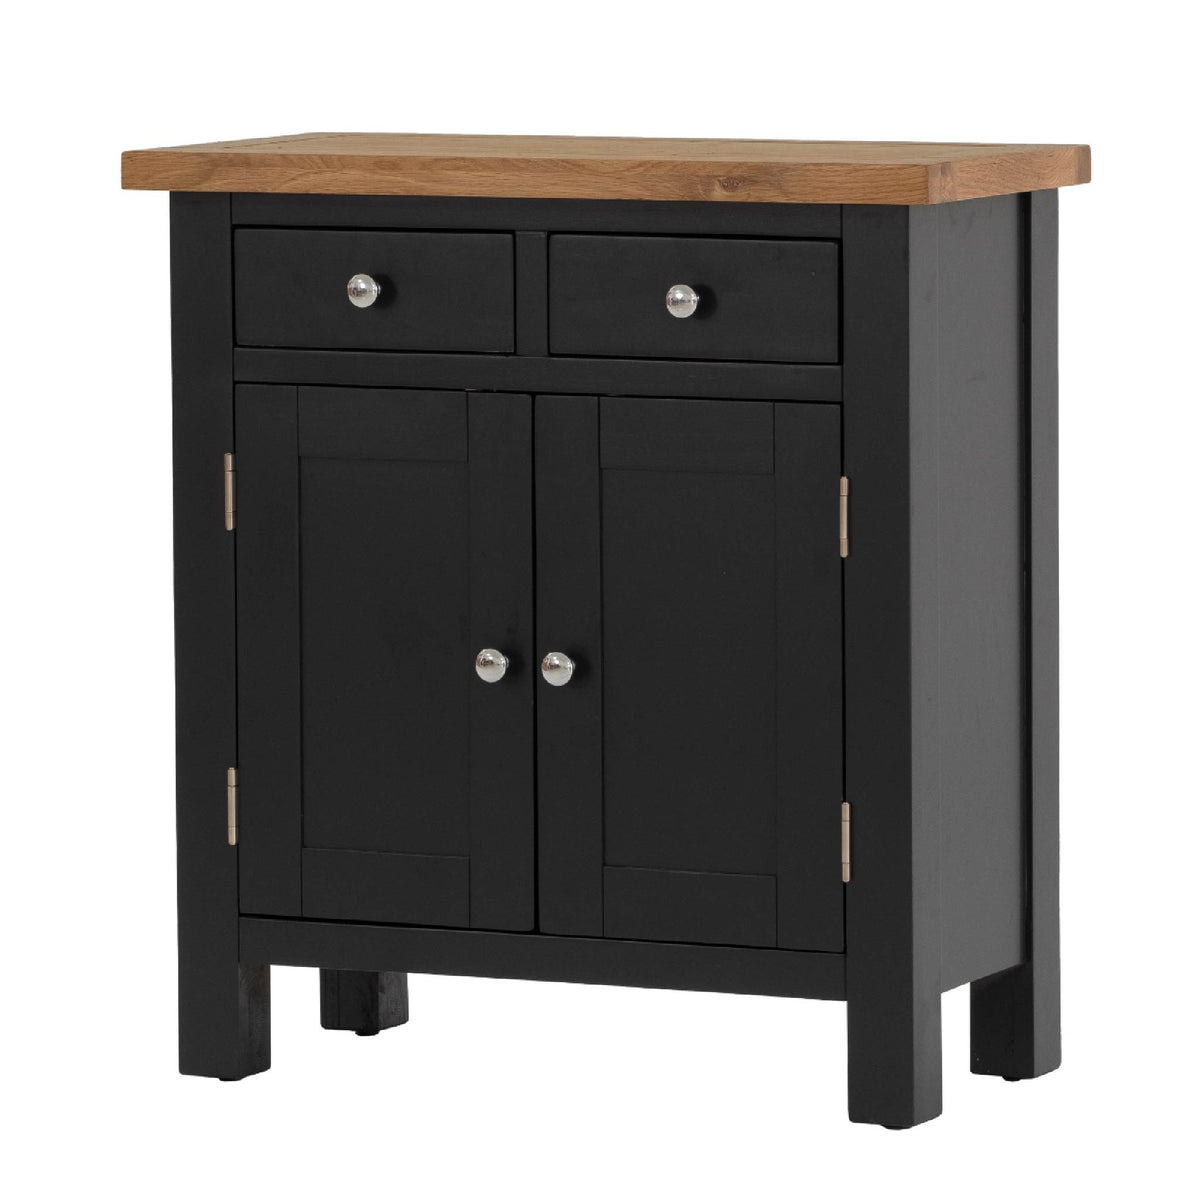 Charlestown Black Small Sideboard - Angled View